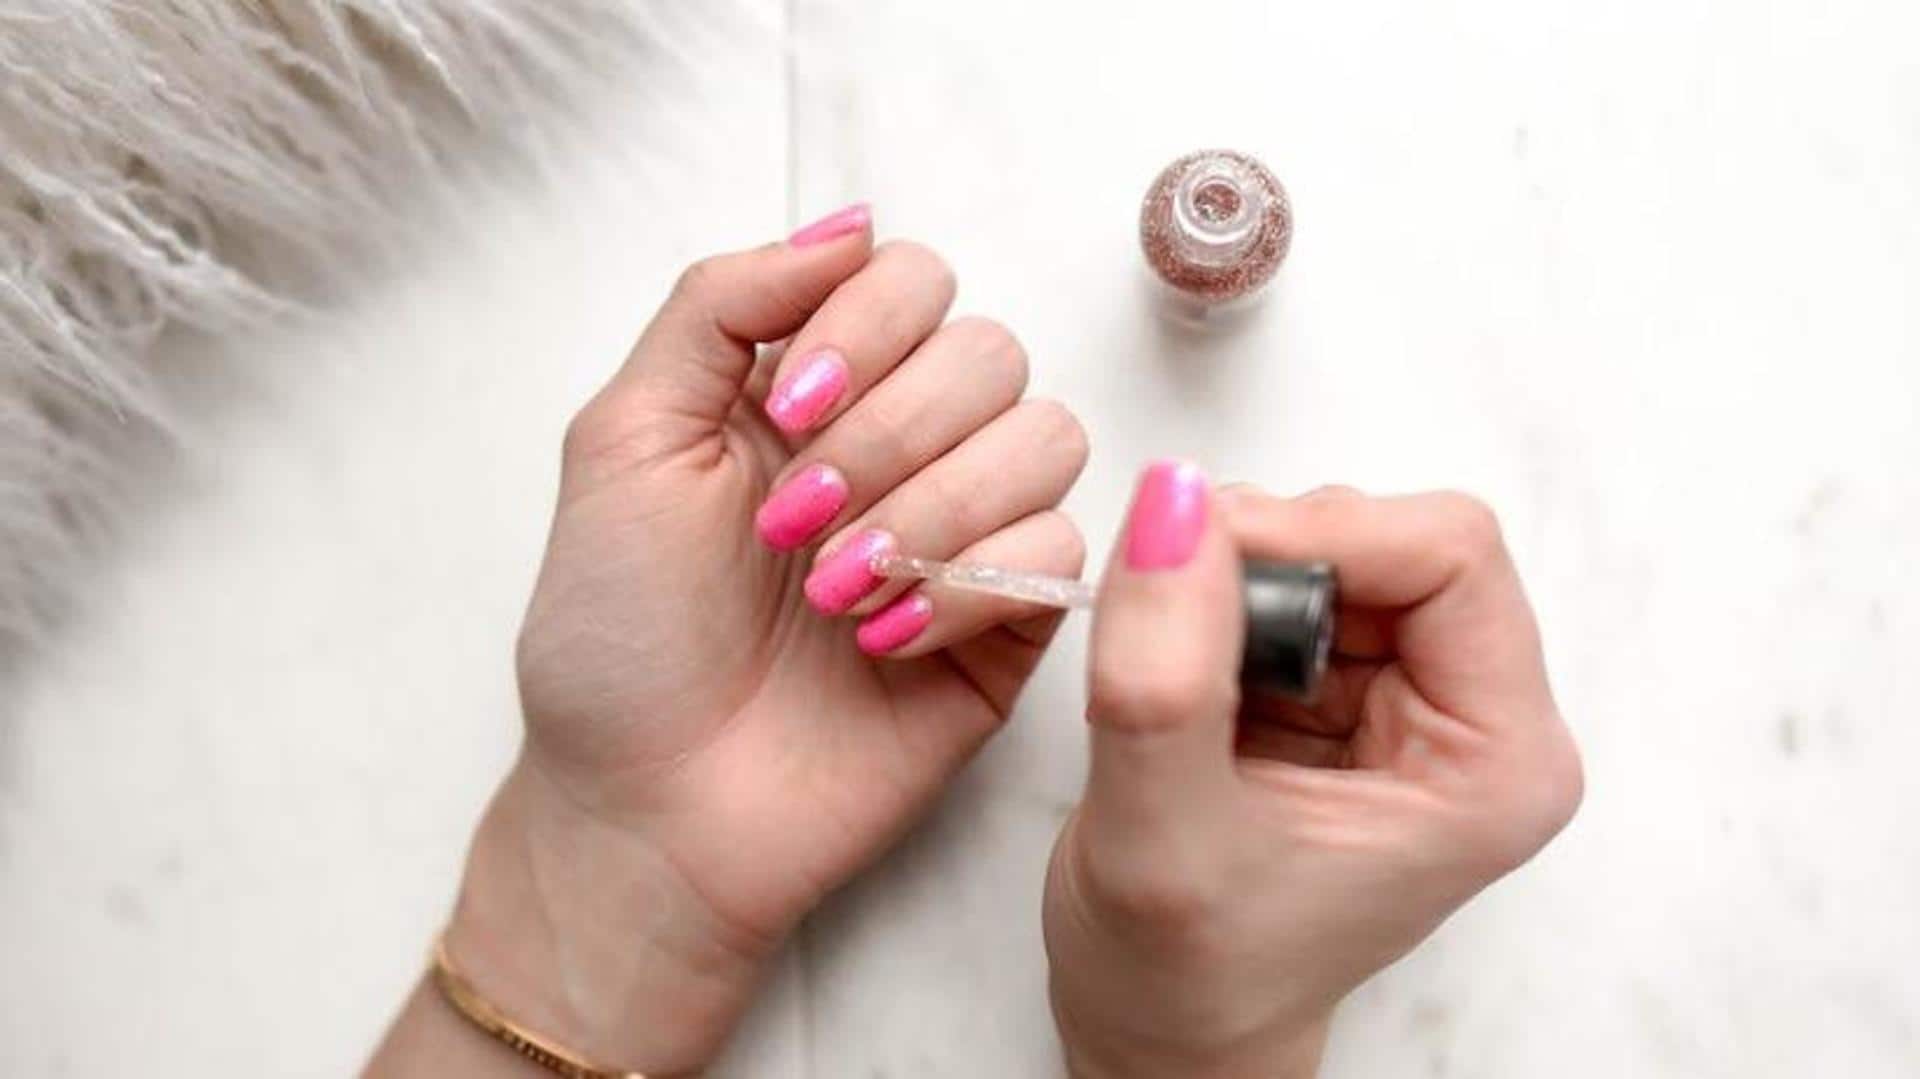 These home remedies will help your nails grow faster